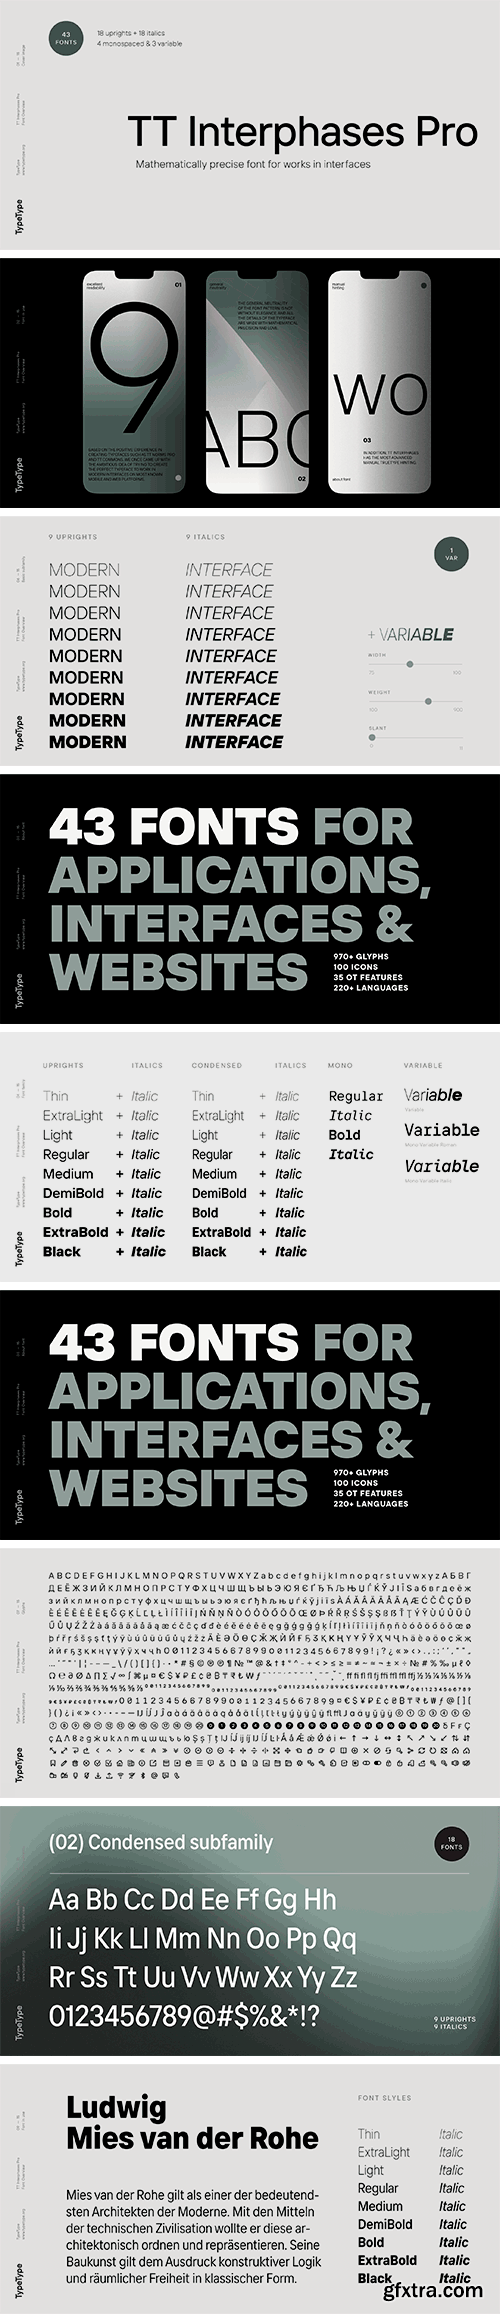 TT Interphases Pro Font Family